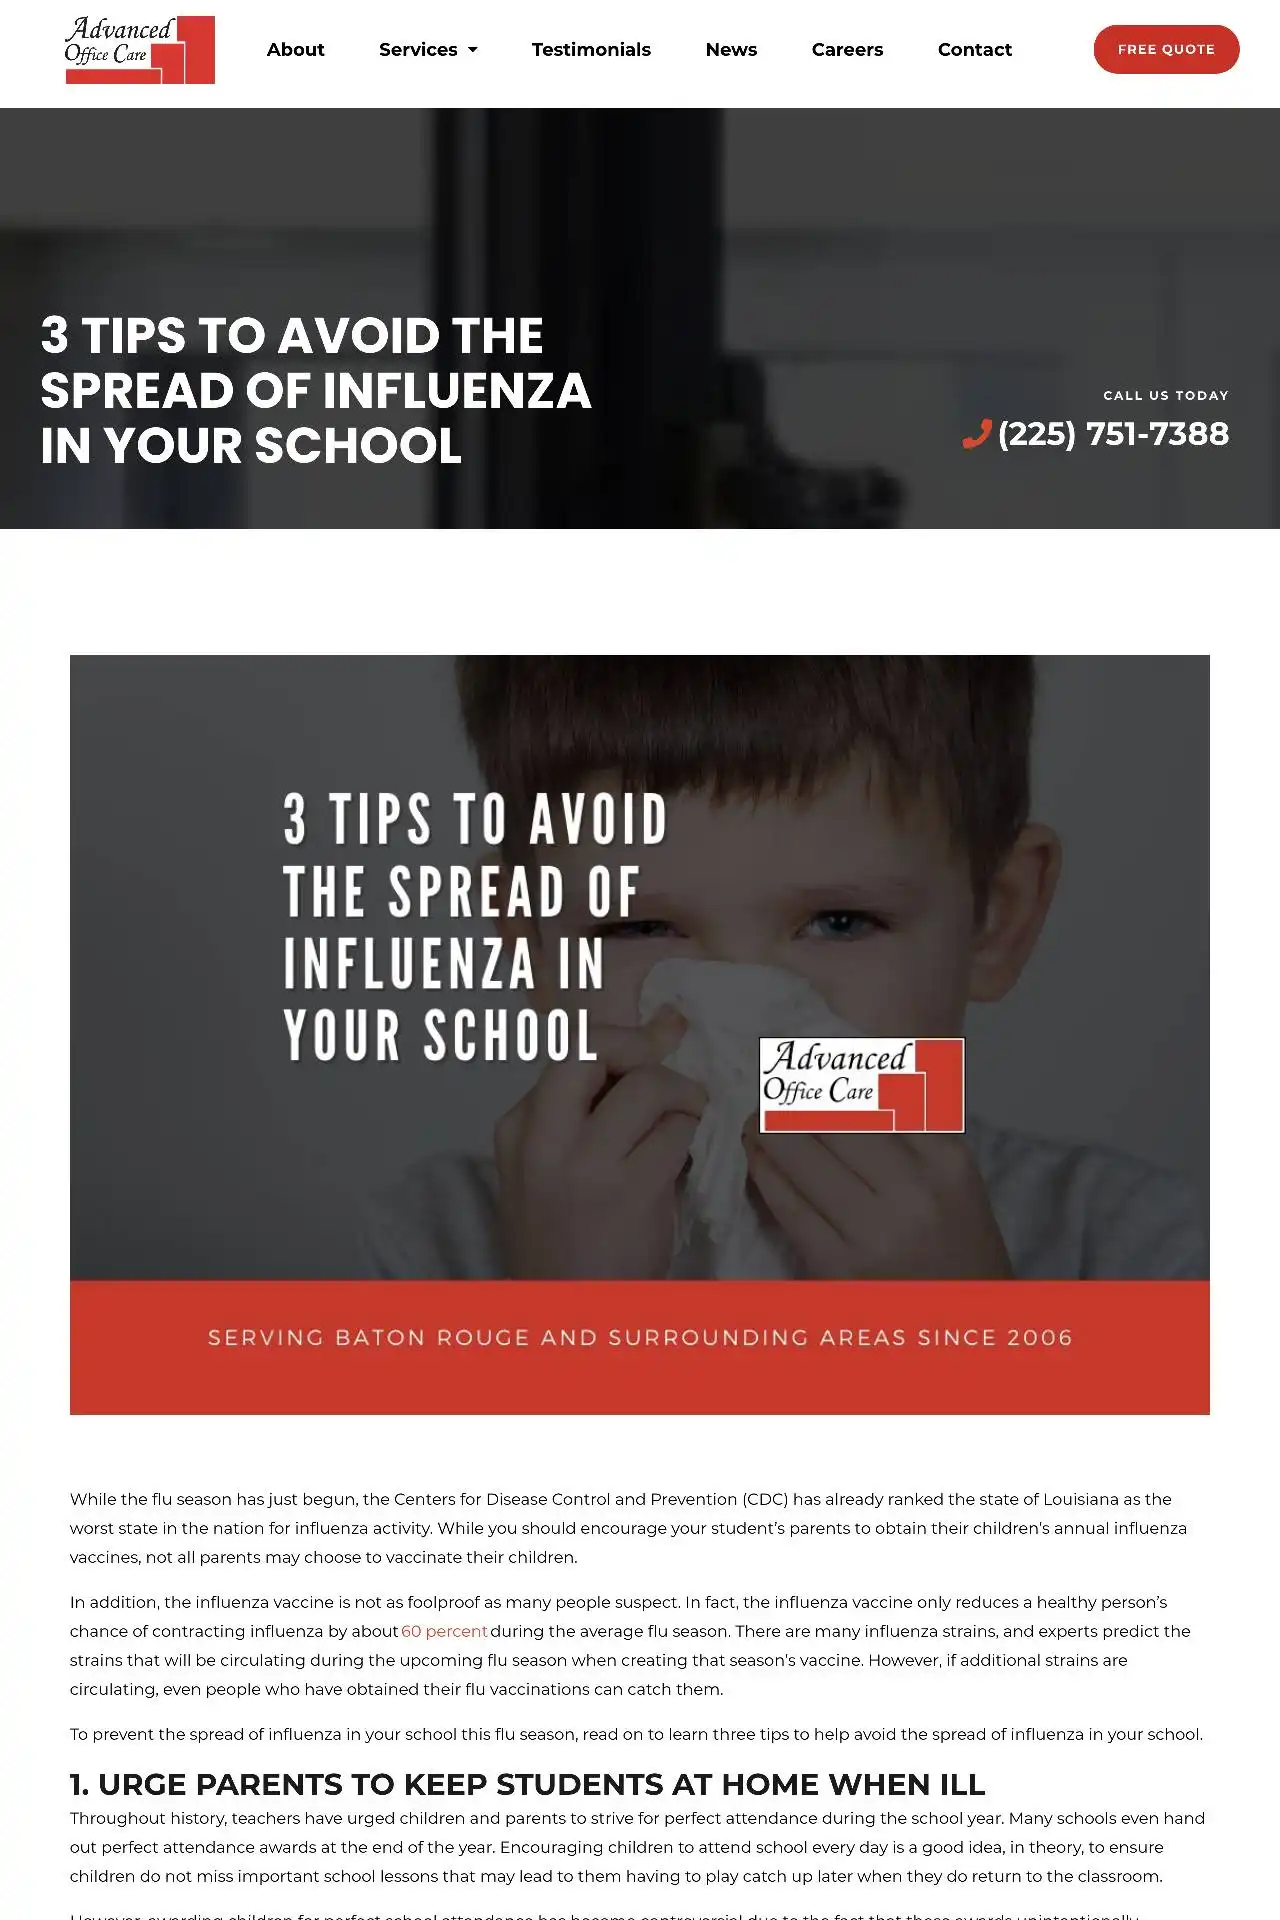 baton rouge cleaning company website design development https aocla.com cleaning 3 tips to avoid the spread of influenza in your school